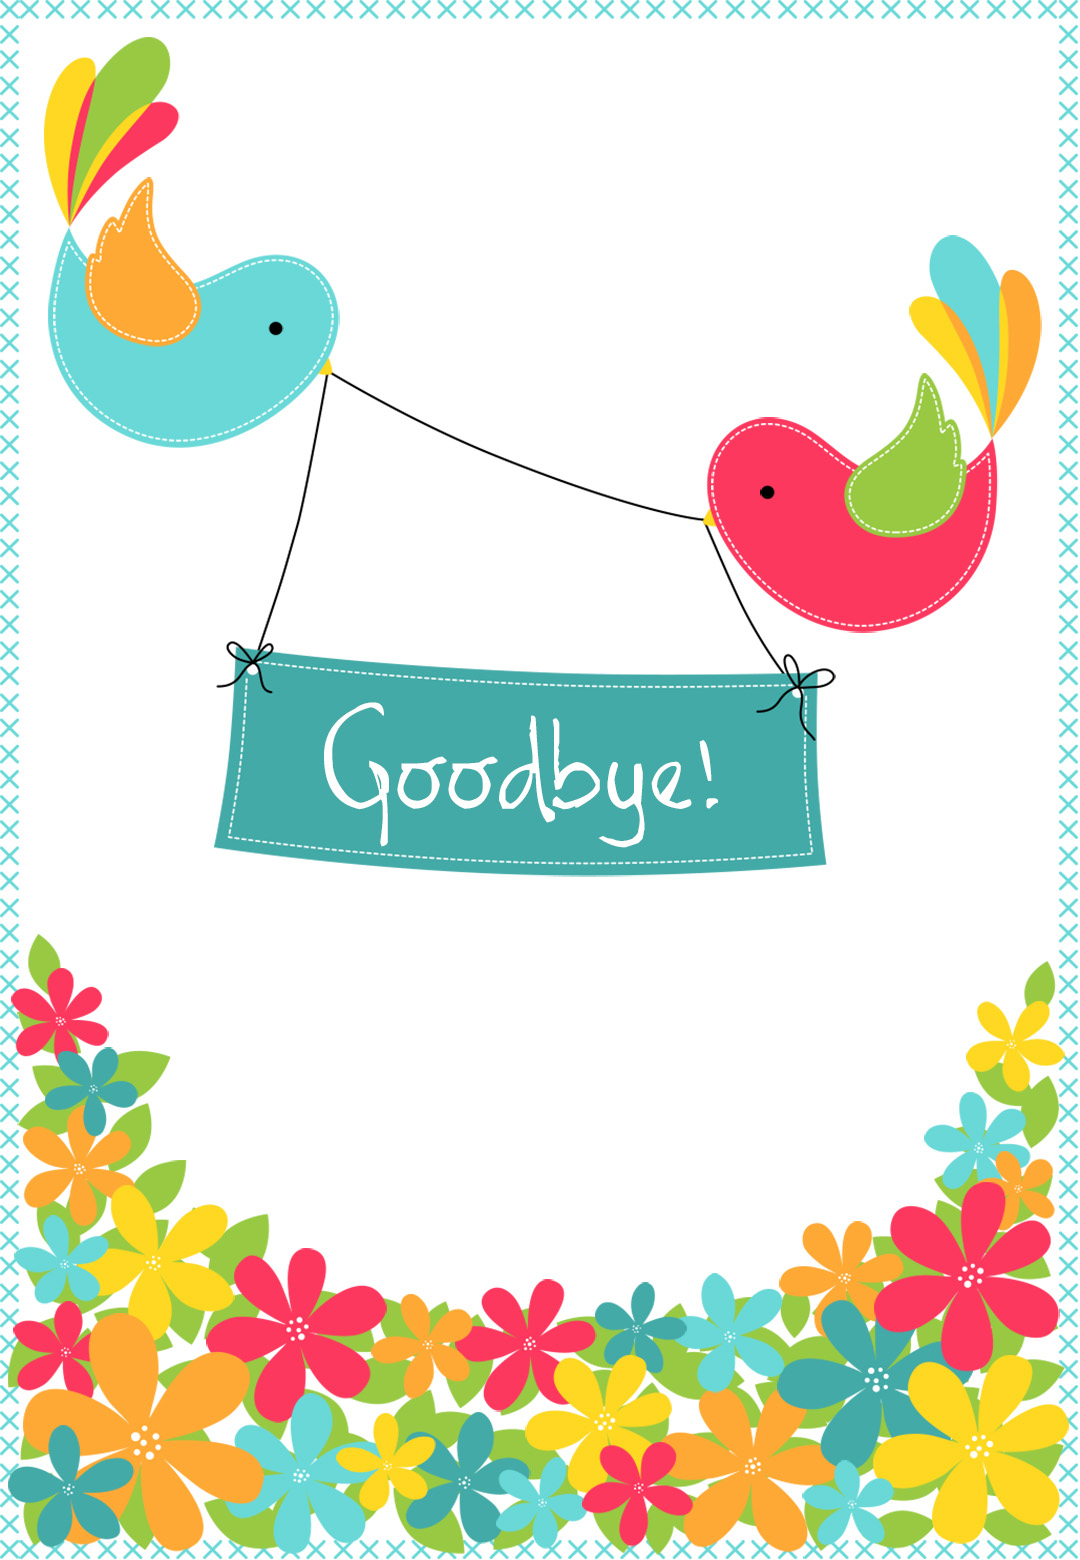 Goodbye From Your Colleagues - Free Good Luck Card | Greetings Island - Free Printable We Will Miss You Greeting Cards